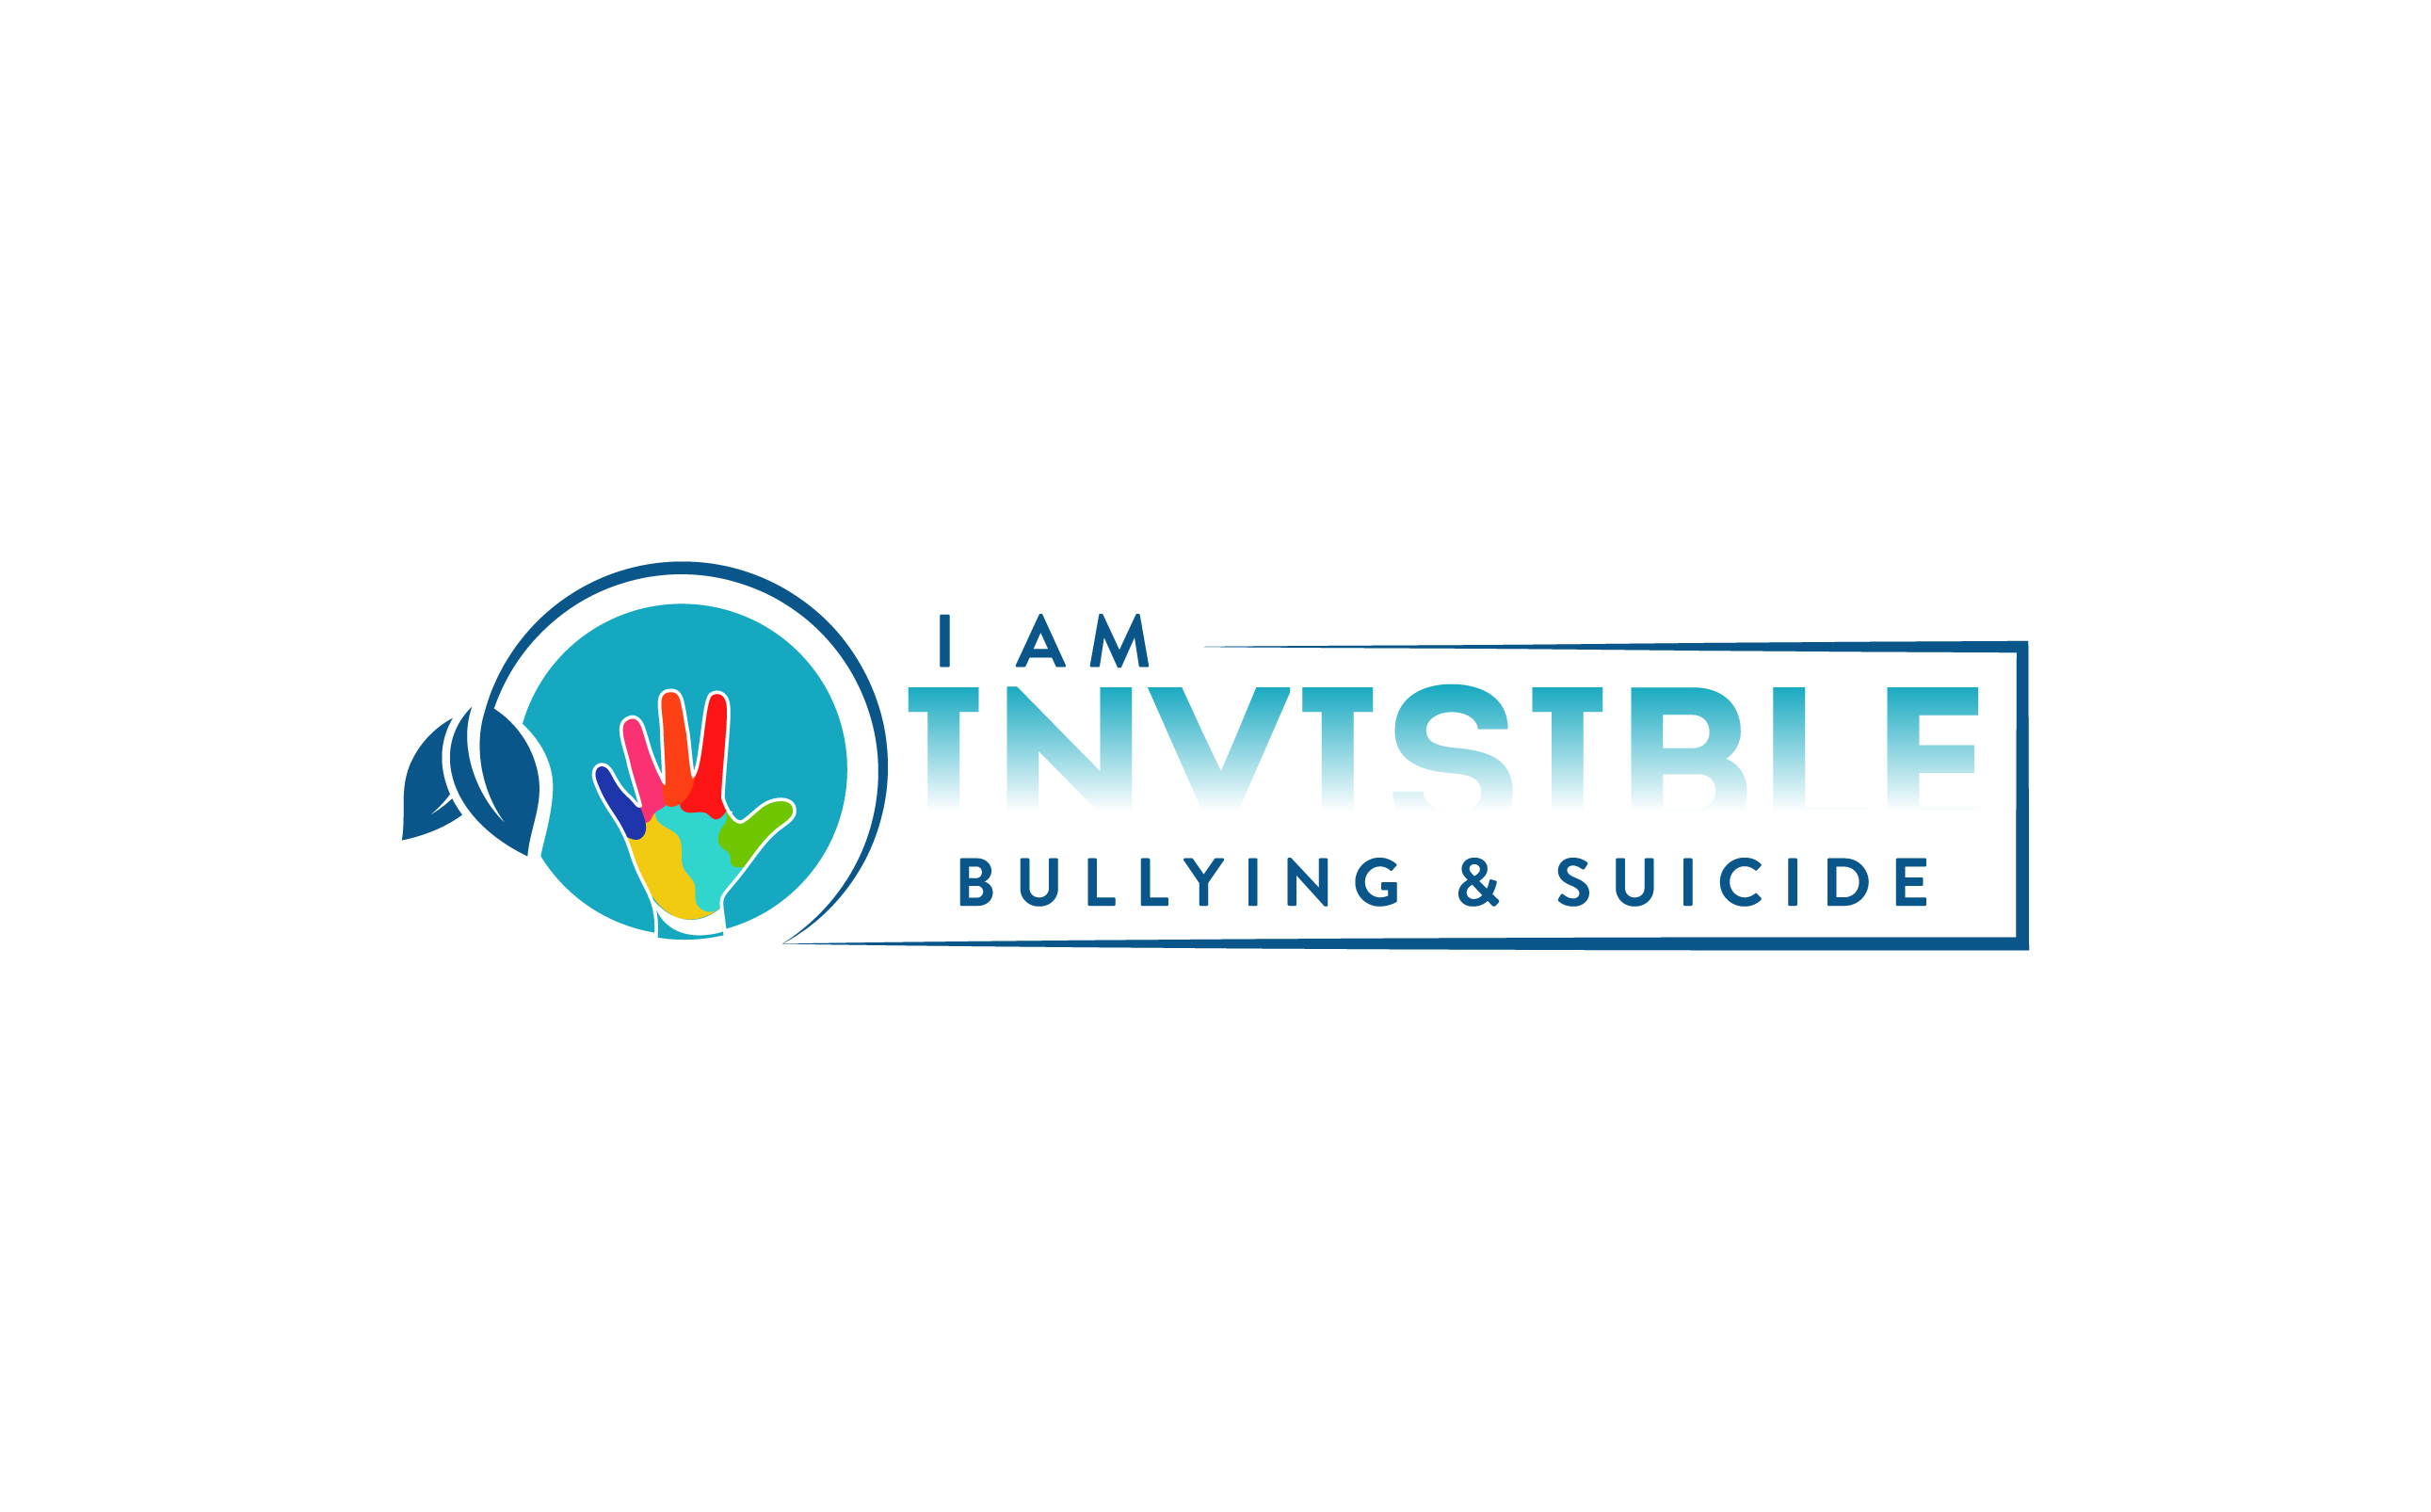 I Am Invisible Bullying & Suicide